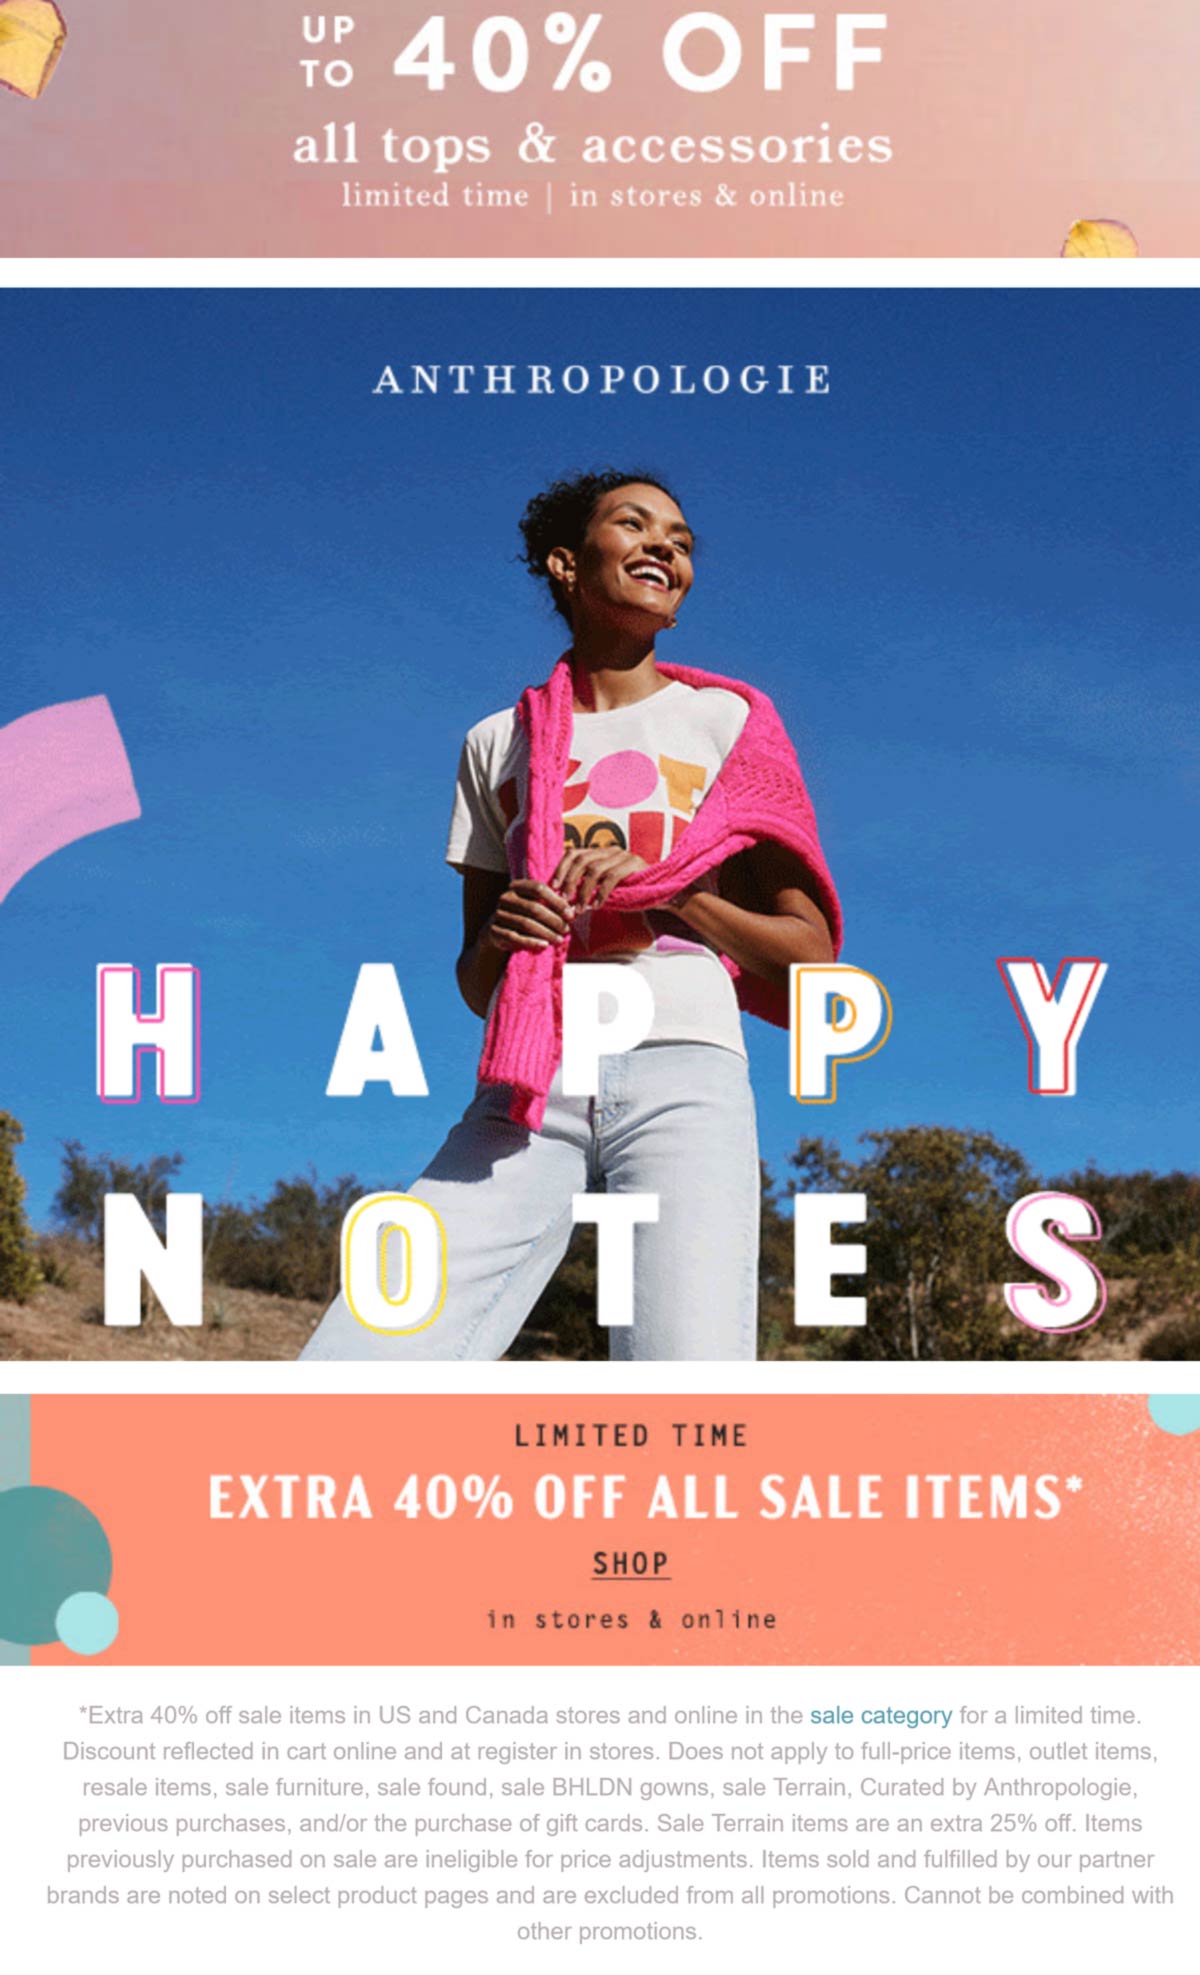 Anthropologie stores Coupon  Extra 40% off all sale styles & more at Anthropologie, ditto online #anthropologie 